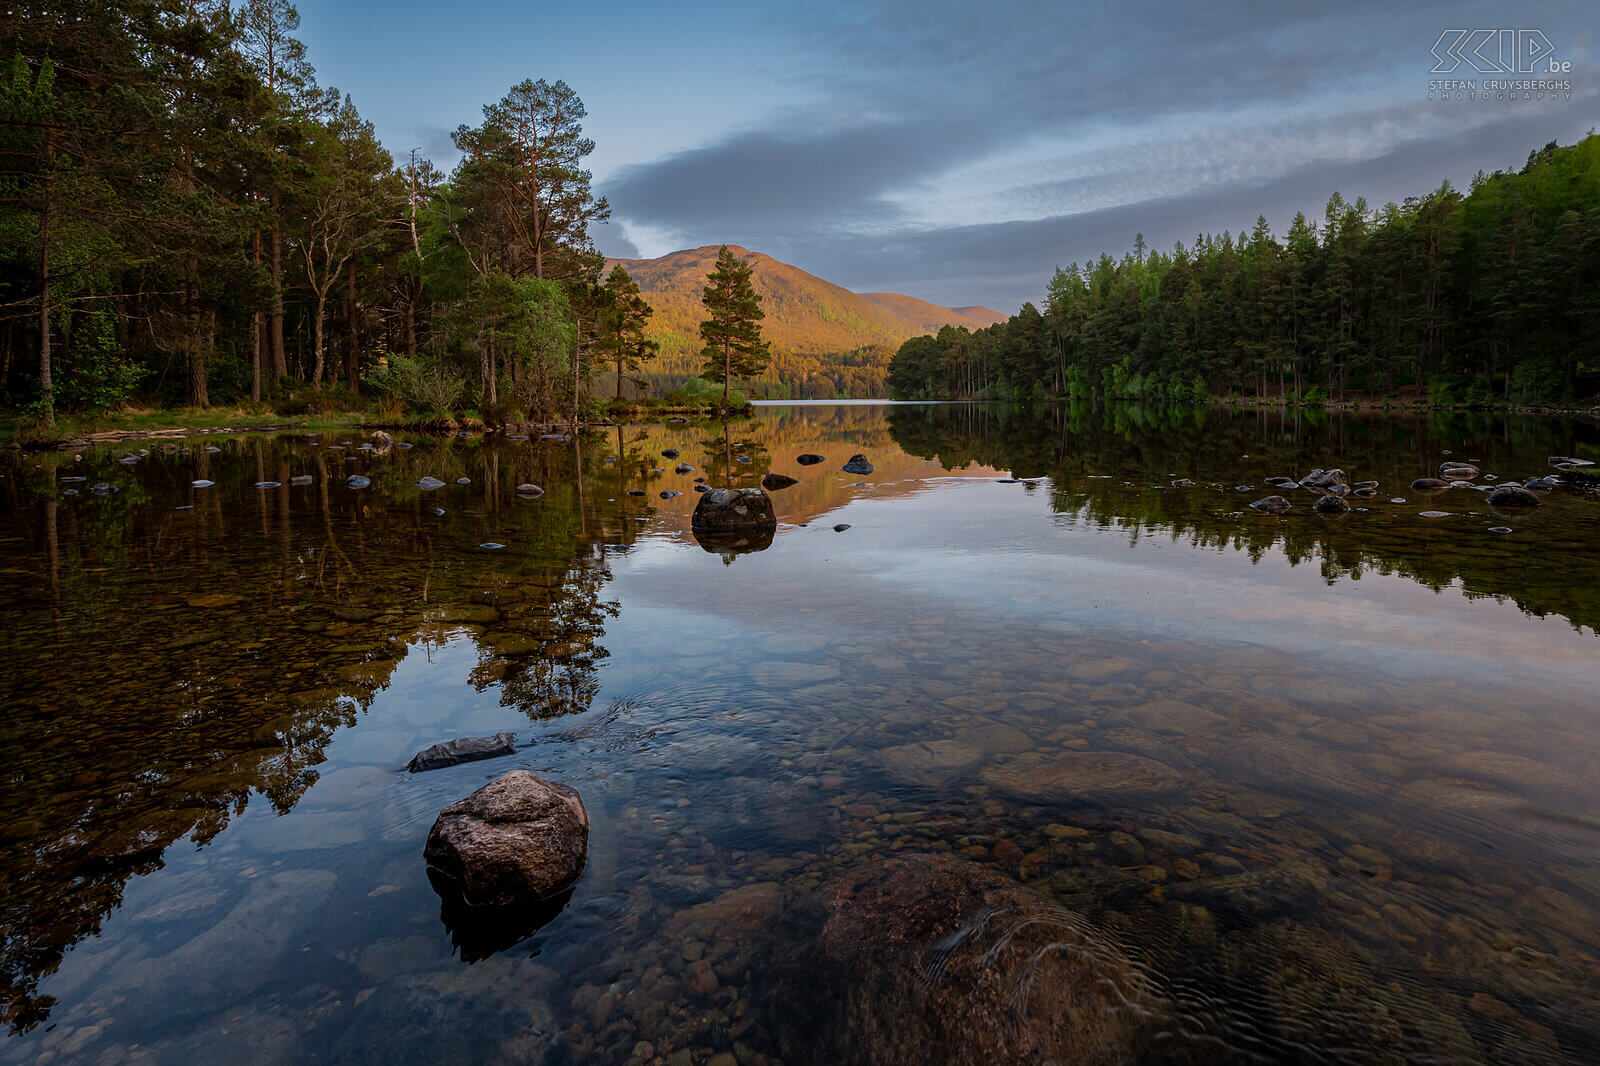 Rothiemurchus - Loch an Eilein Sunset at the beautiful Loch an Eileen in the Rothiemurchus Estate in the Cairgnorms National Park. Stefan Cruysberghs